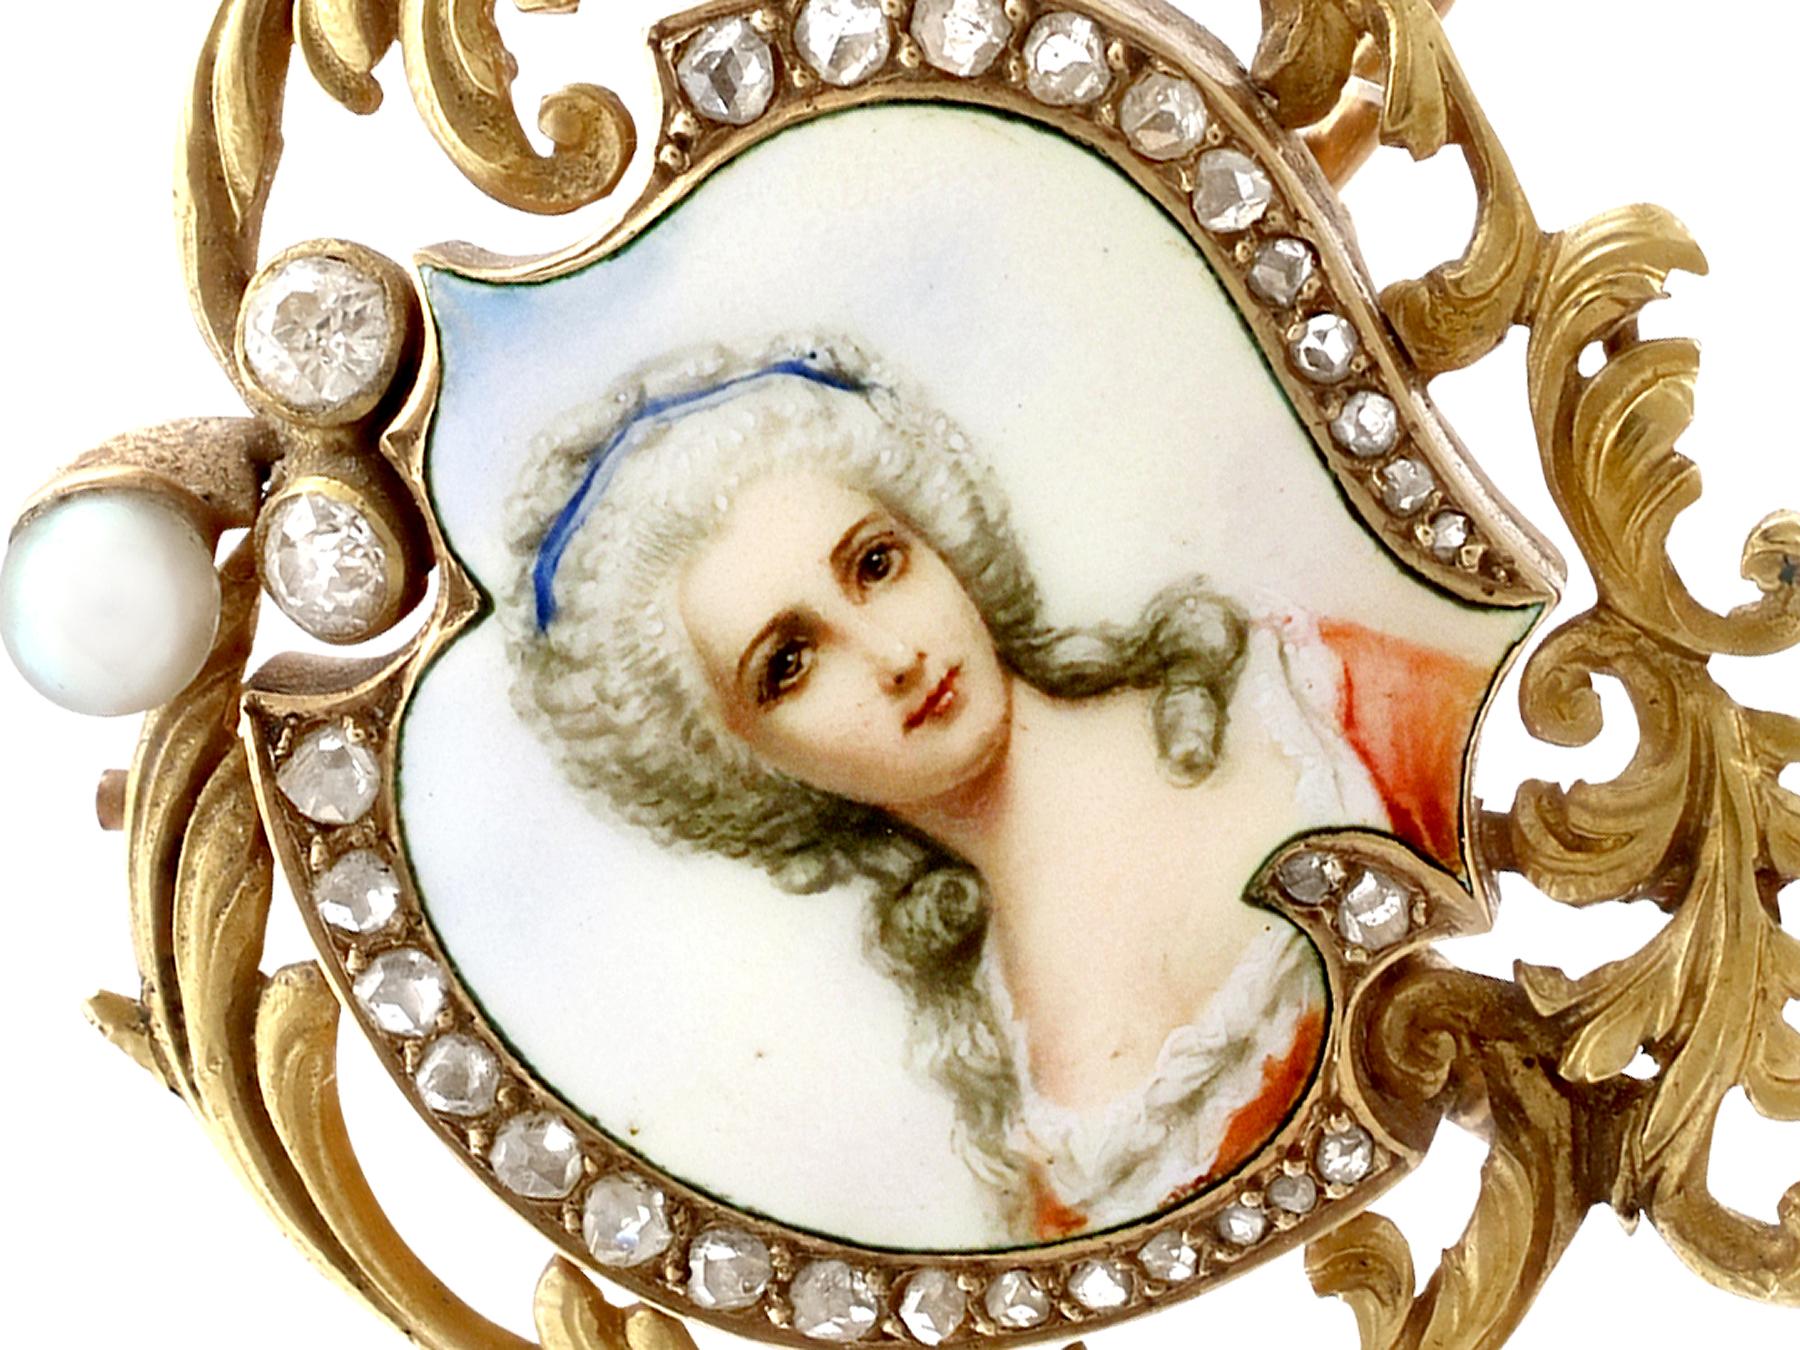 This stunning, fine and impressive antique enamel brooch has been crafted in 18k yellow gold.

The pierced decorated, asymmetrical setting displays a feature hand-painted enamel miniature portrait, depicting a young lady in period dress.

The